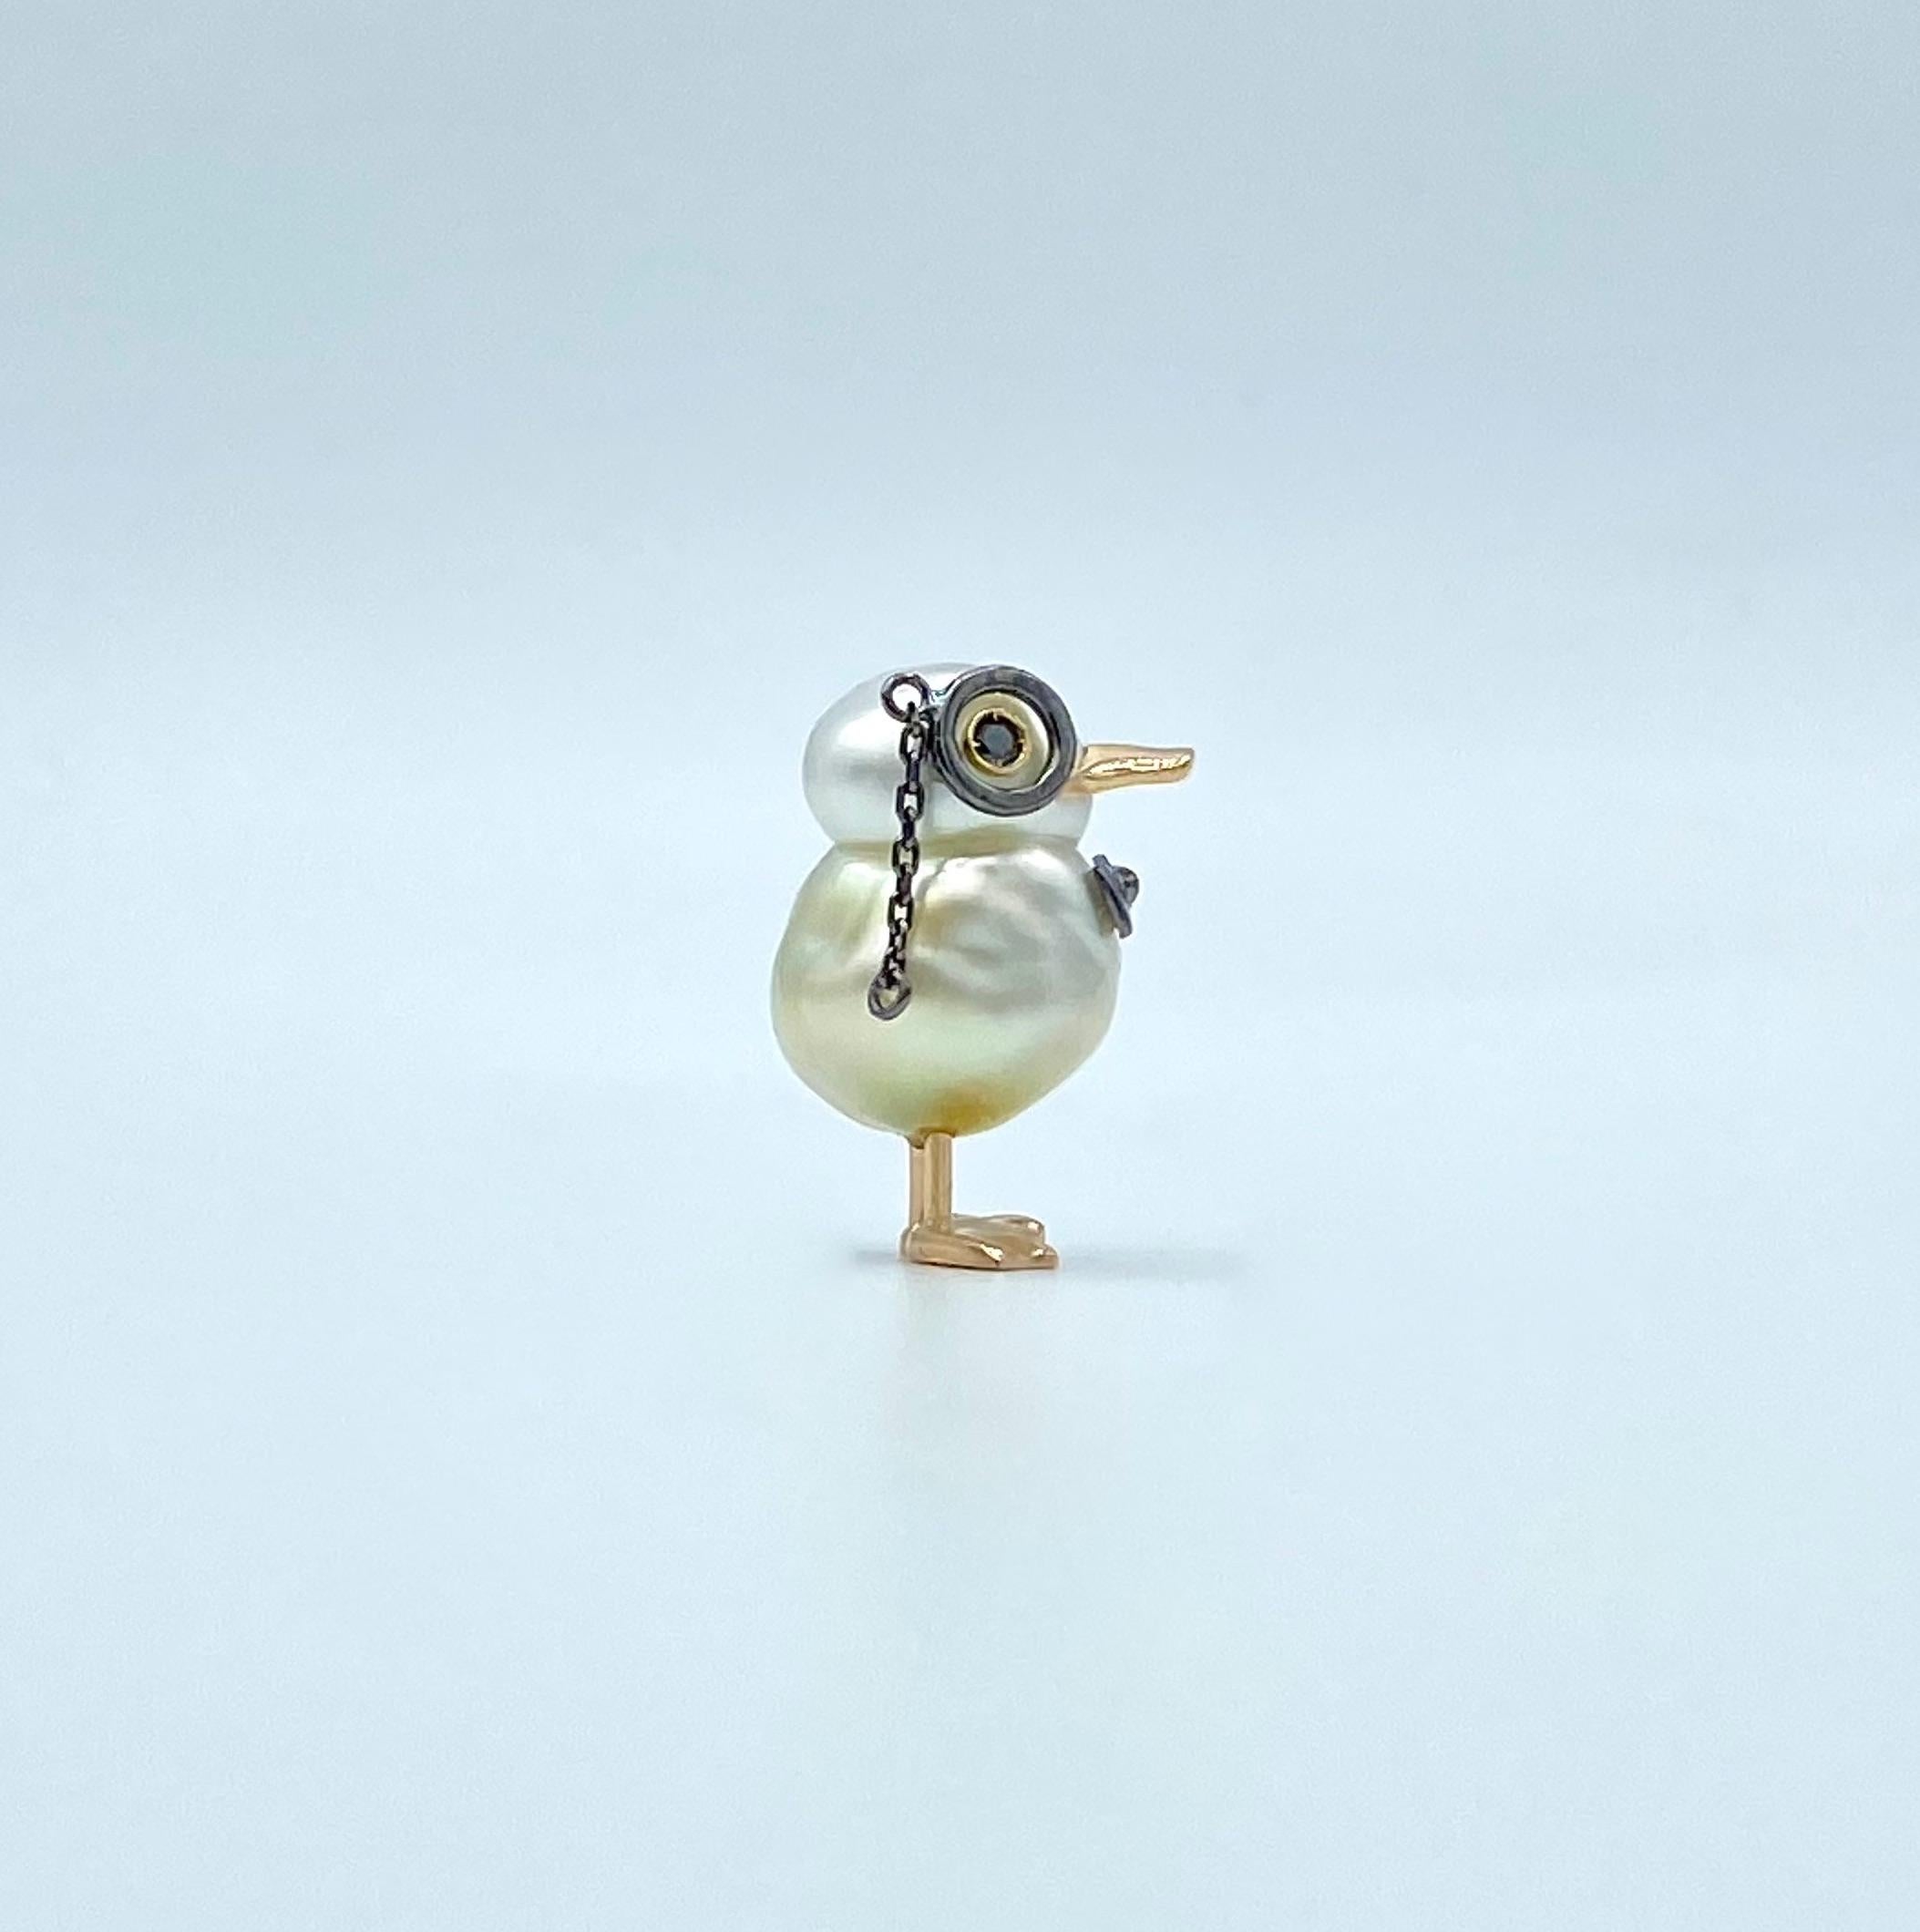 I used an Australian pearl measuring 11 x 15.5mm to make a cute duck that wears monocle and a bow tie  to wear as a jacket pin.
The 18KT gold used is red for the beak and legs. 
The 18Kt white gold monocle and bow tie are black rhodium